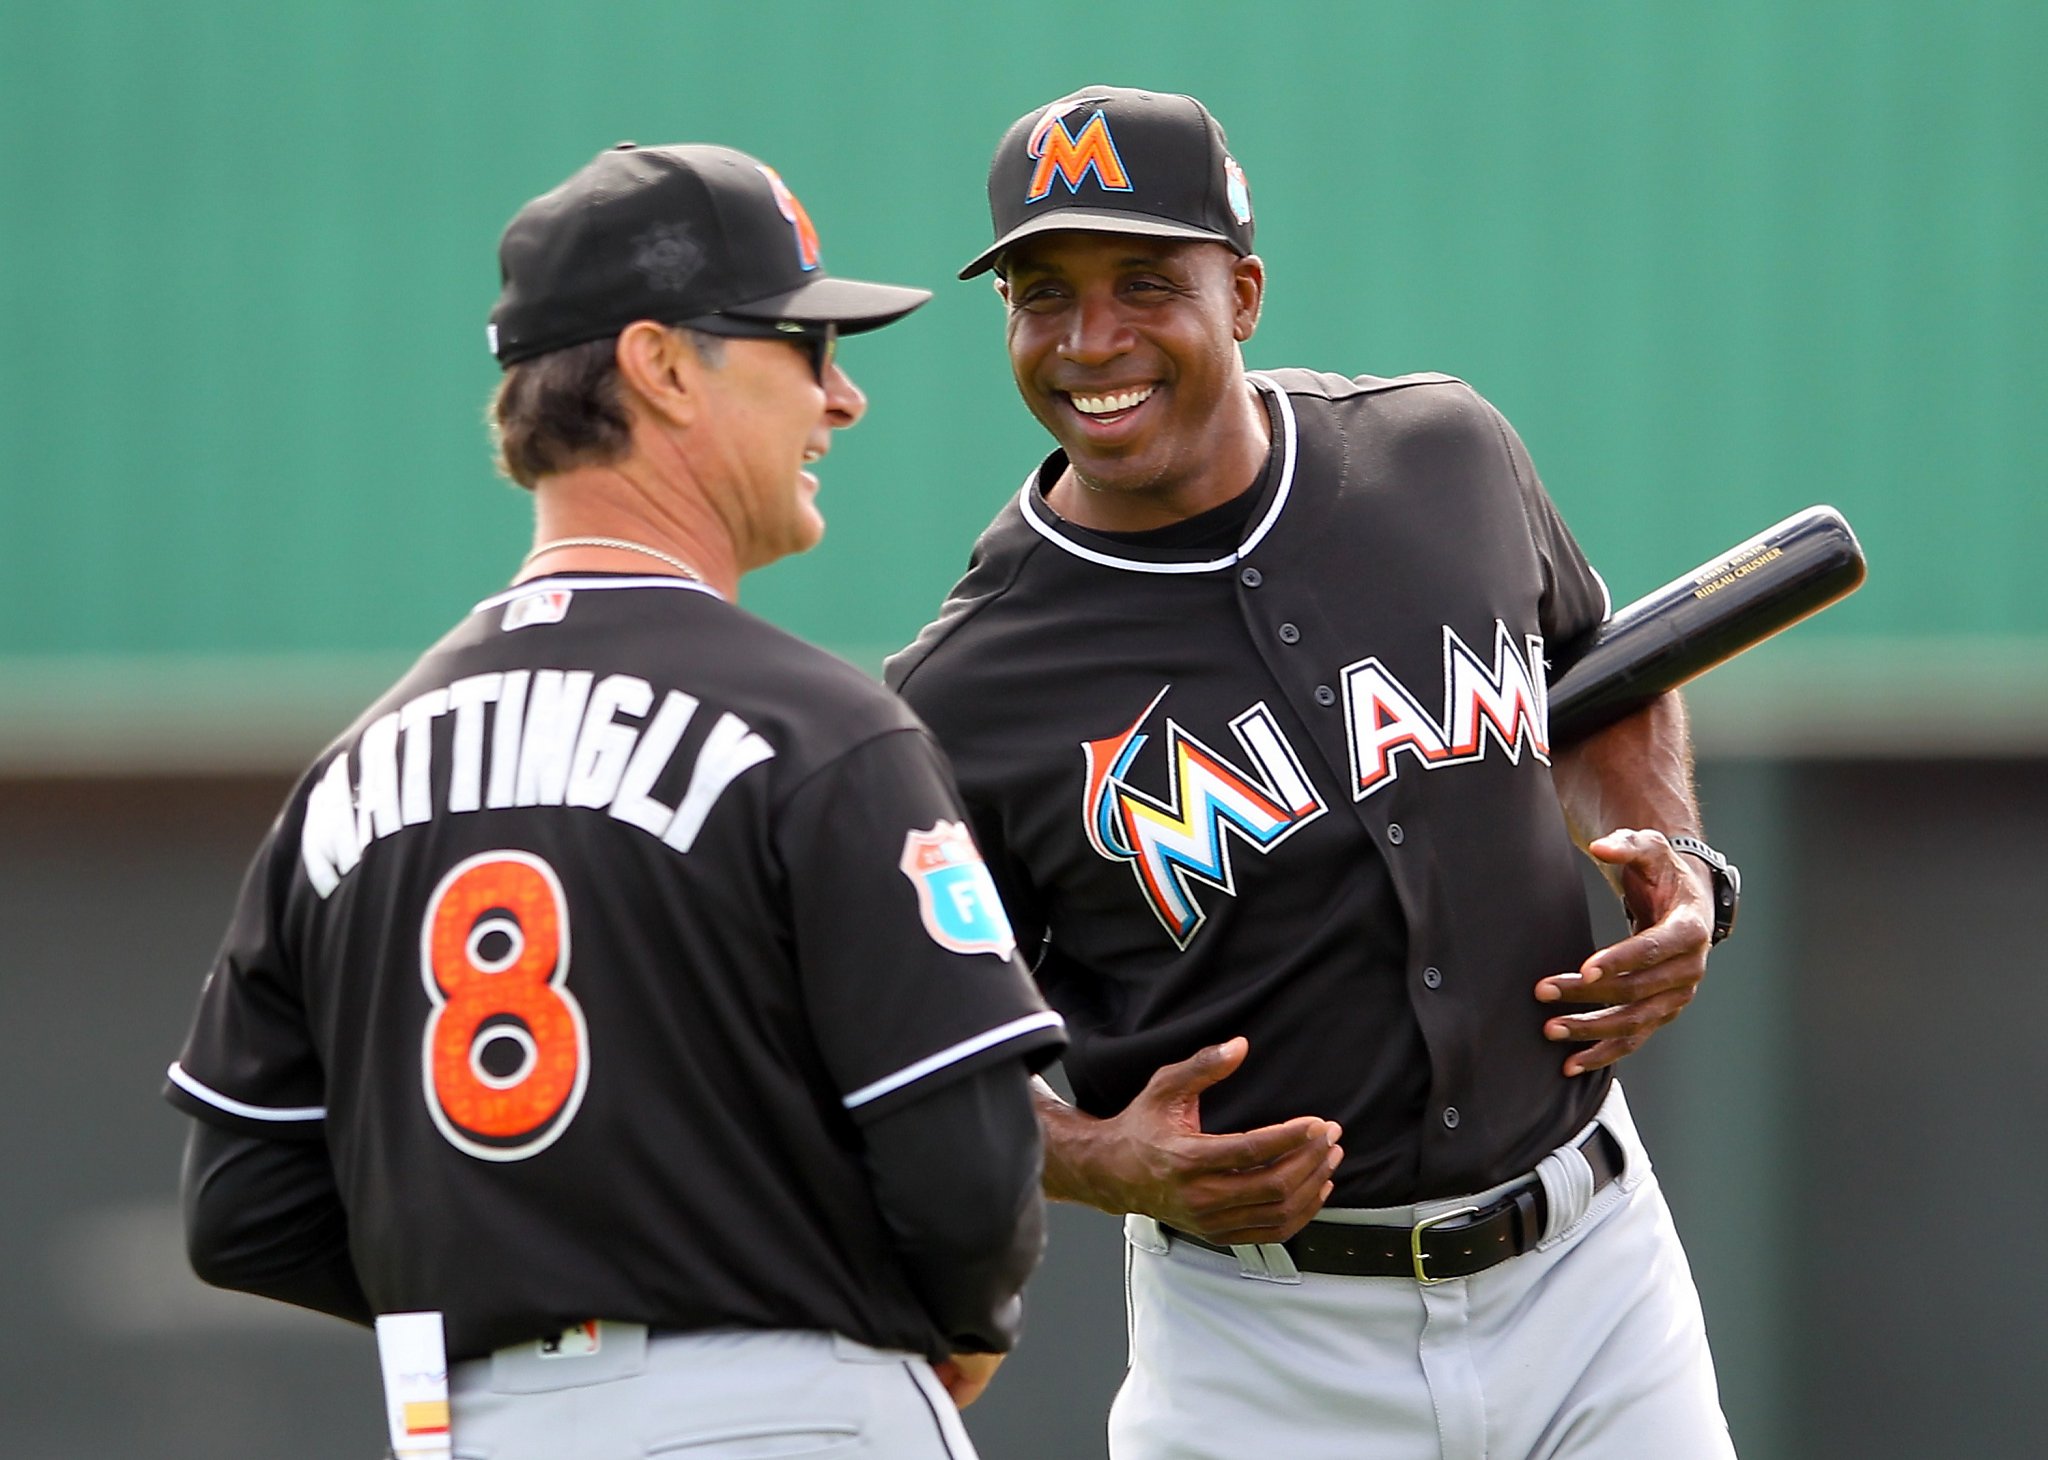 With spring training underway, Marlins manager Don Mattingly